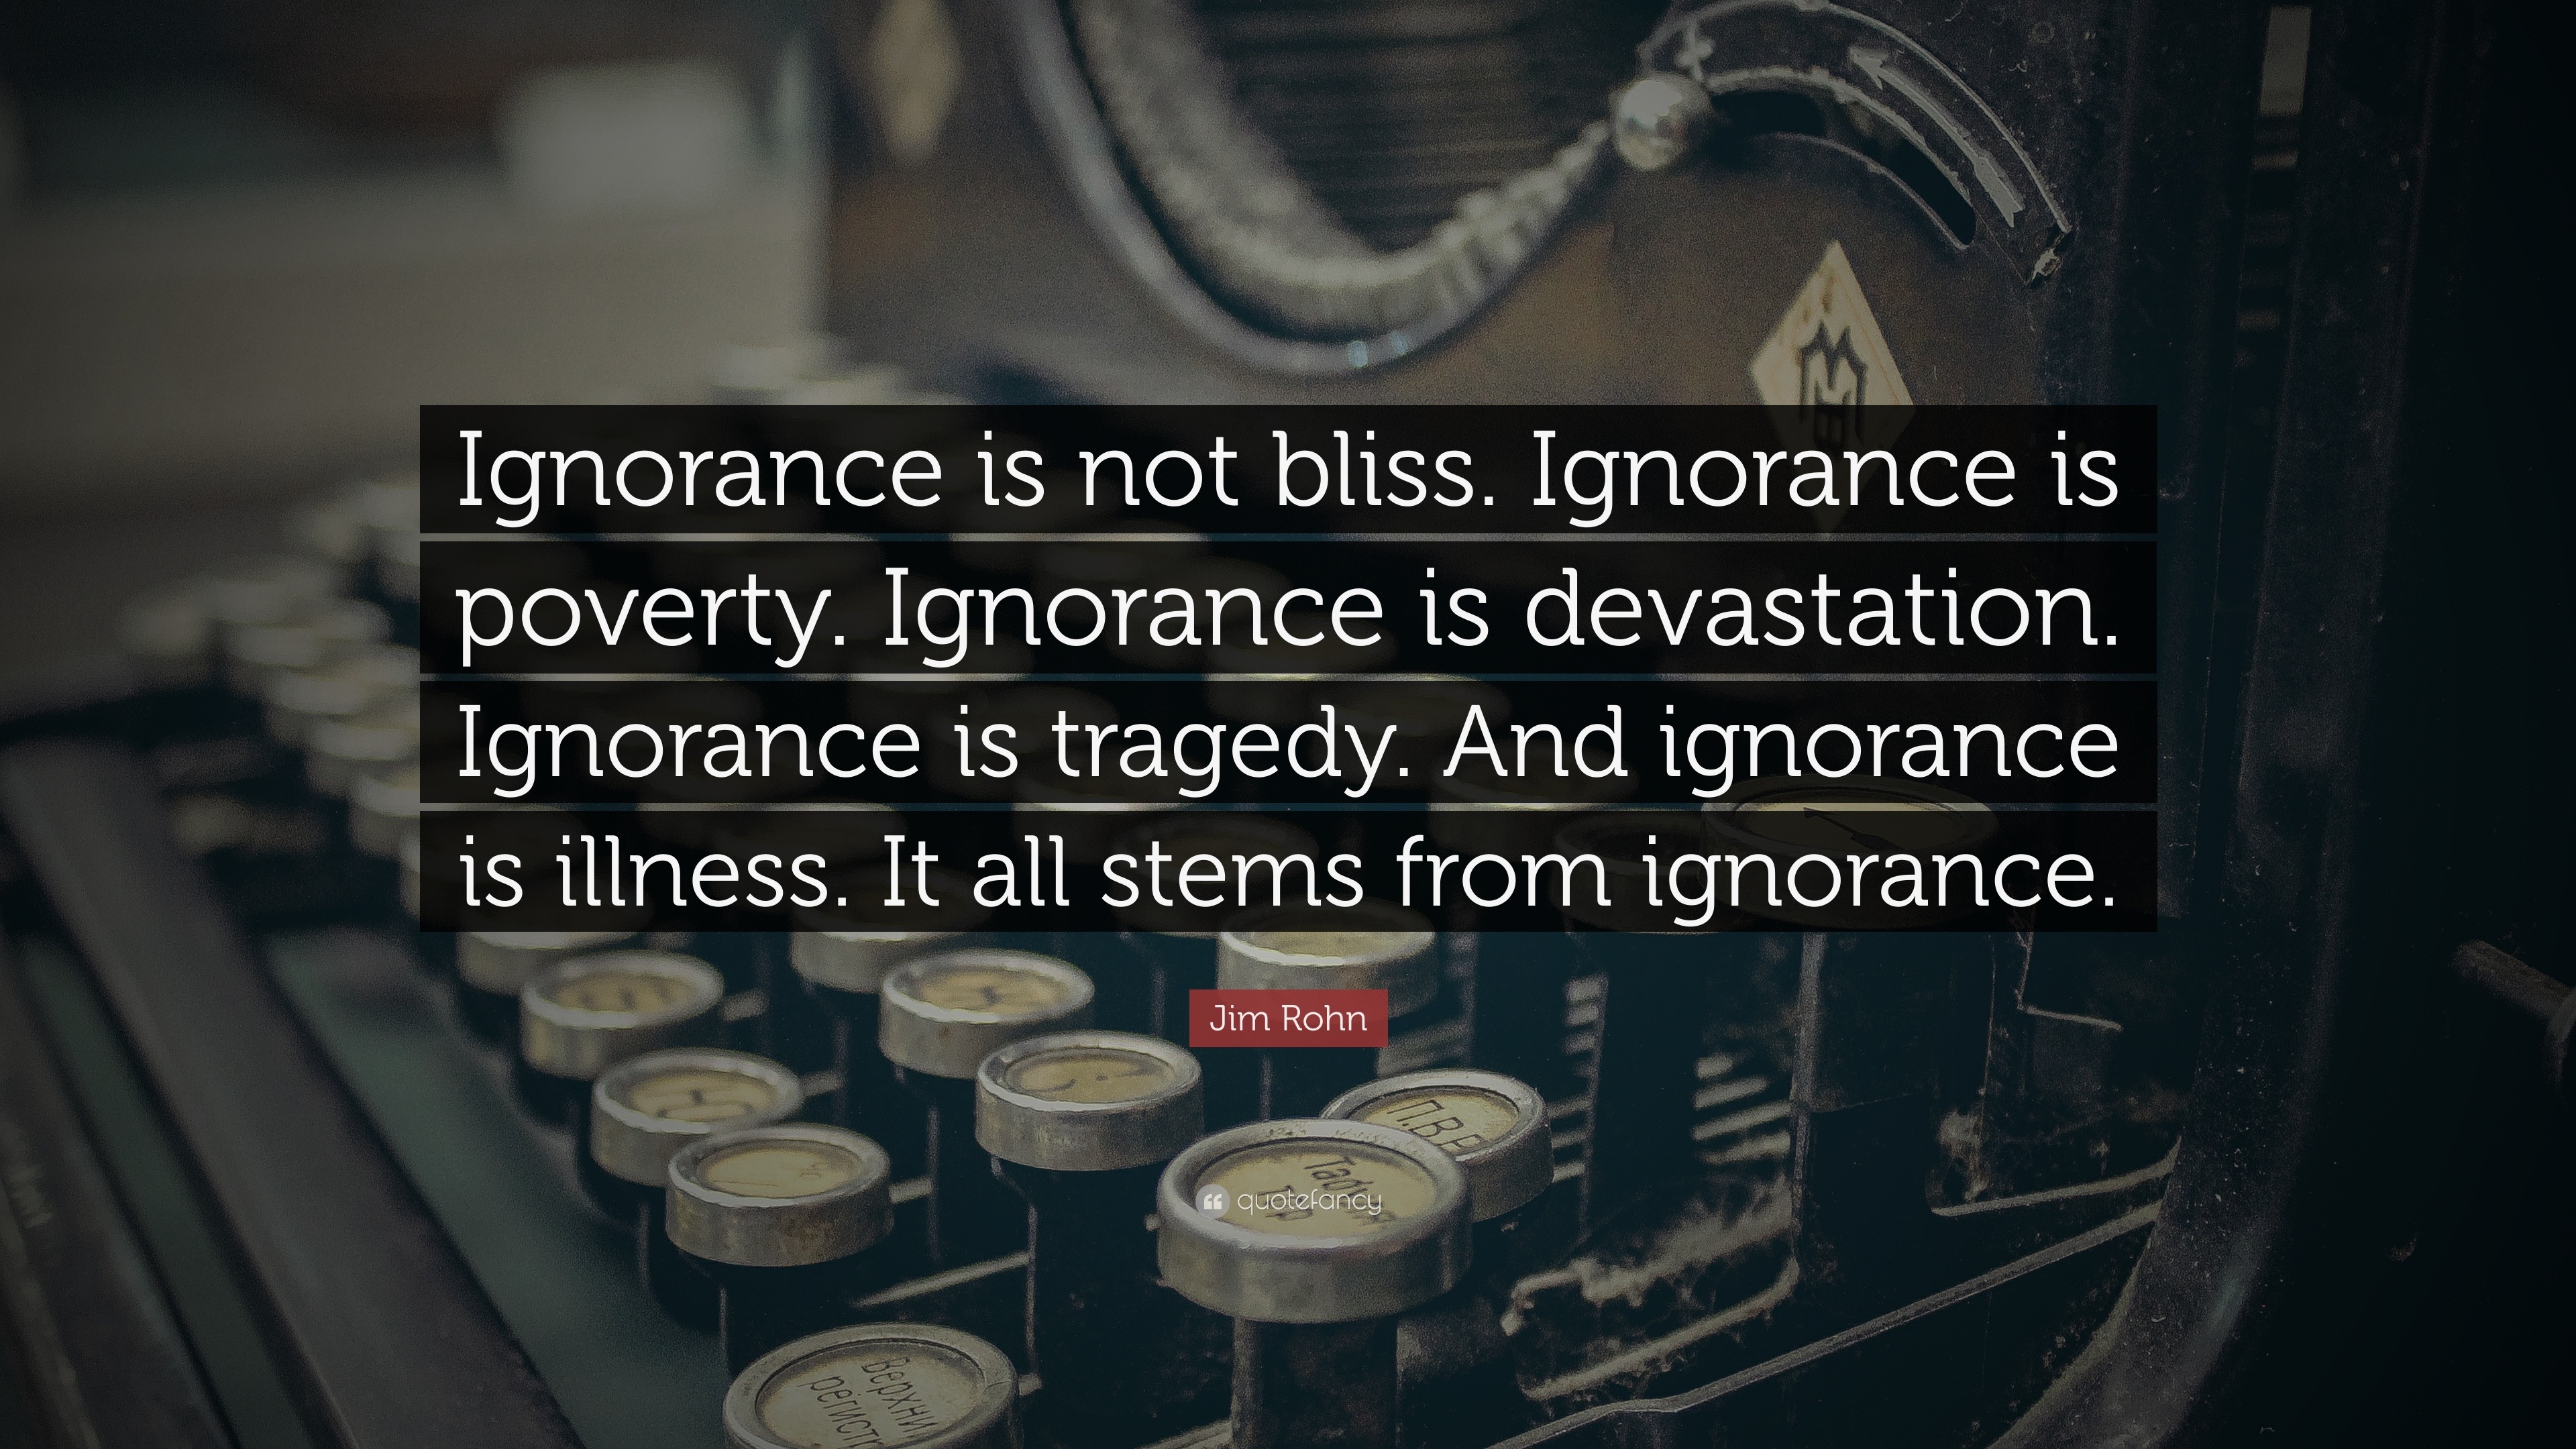 Ignorance is not bliss. 